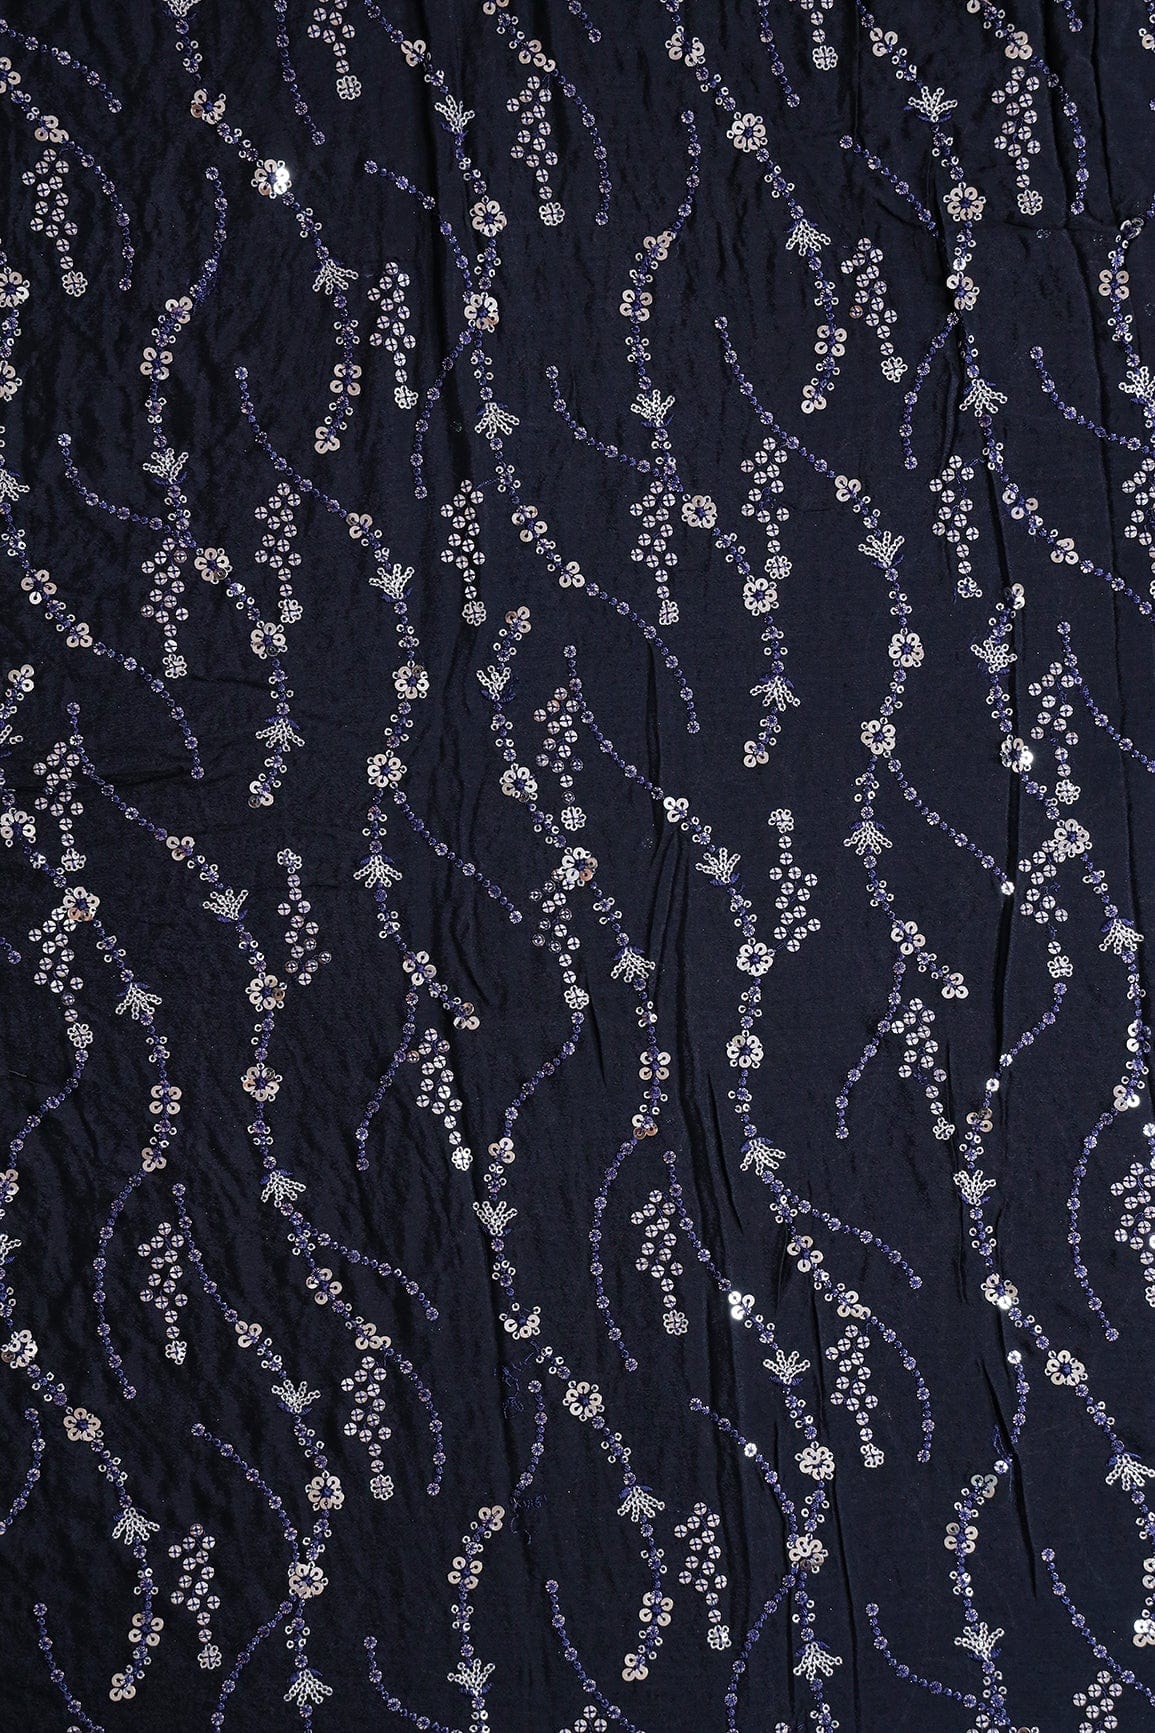 doeraa Embroidery Fabrics 4 Meter Cut Piece Of Silver Sequins With Navy Blue Thread Abstract Embroidery On Dark Navy Blue Soft Net Fabric